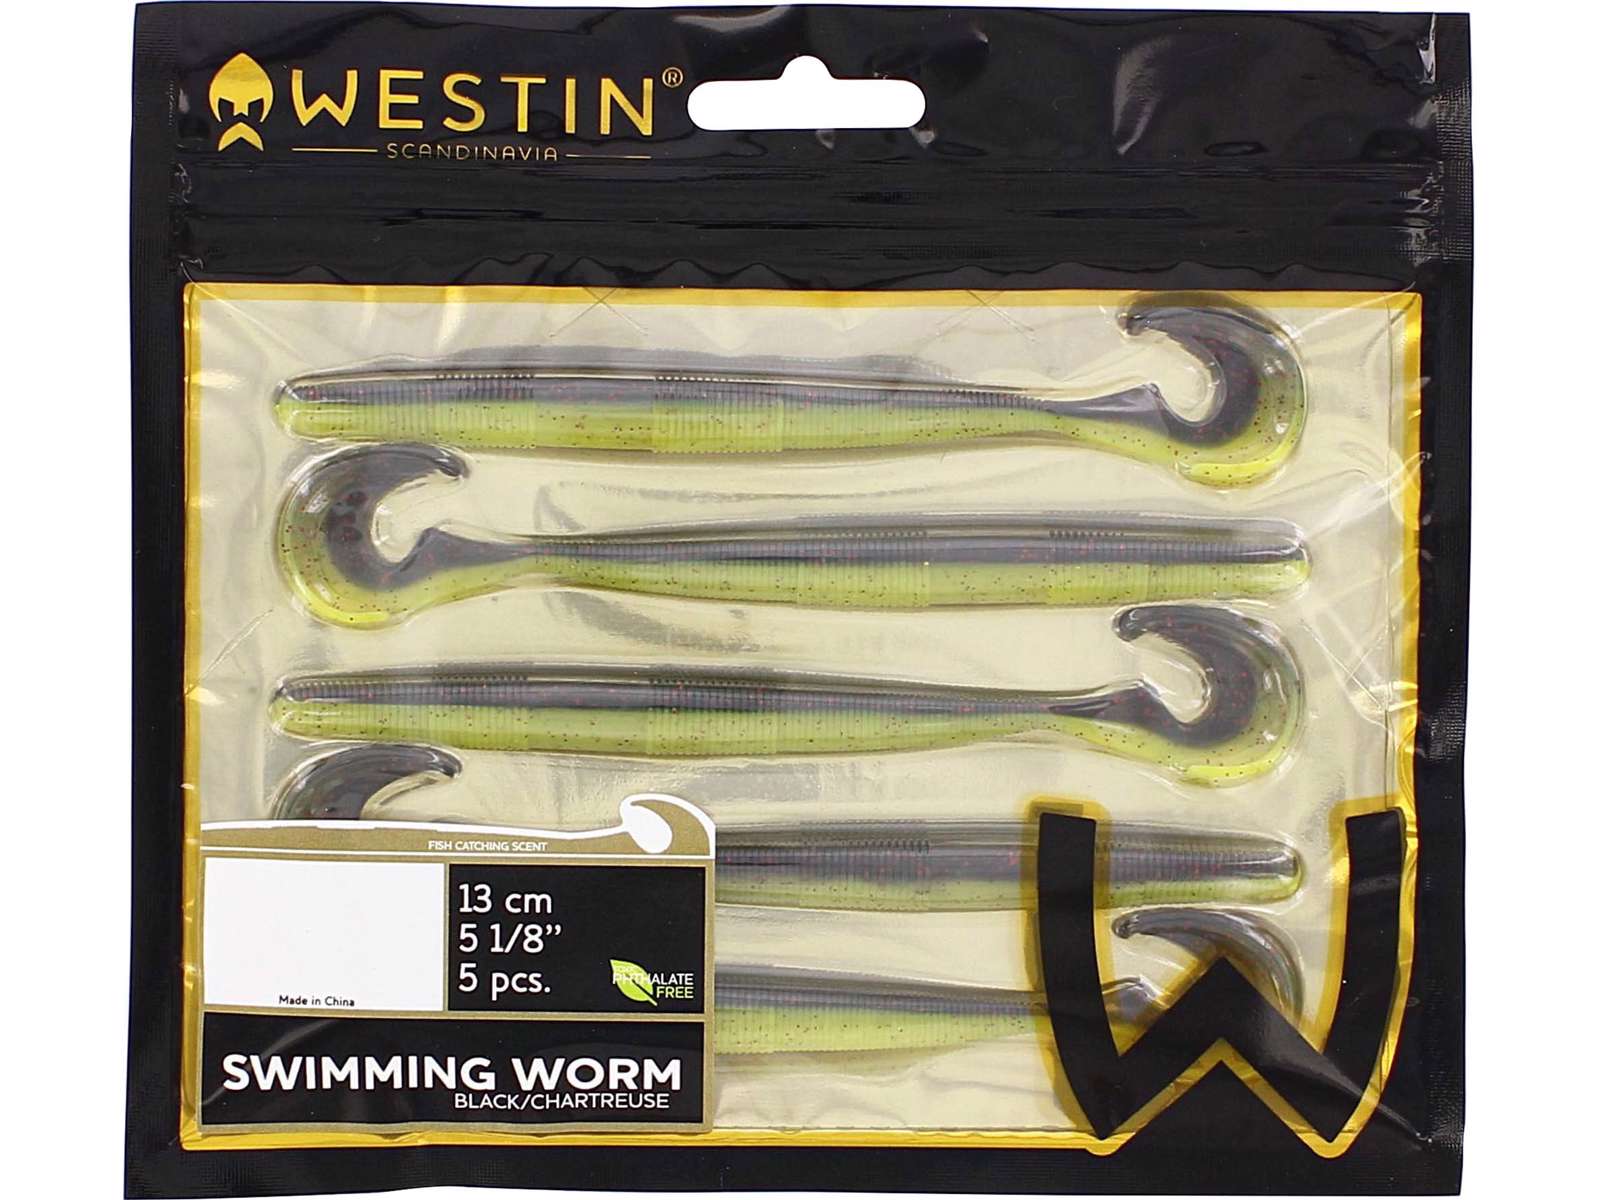 Westin Swimming Worm Packaging